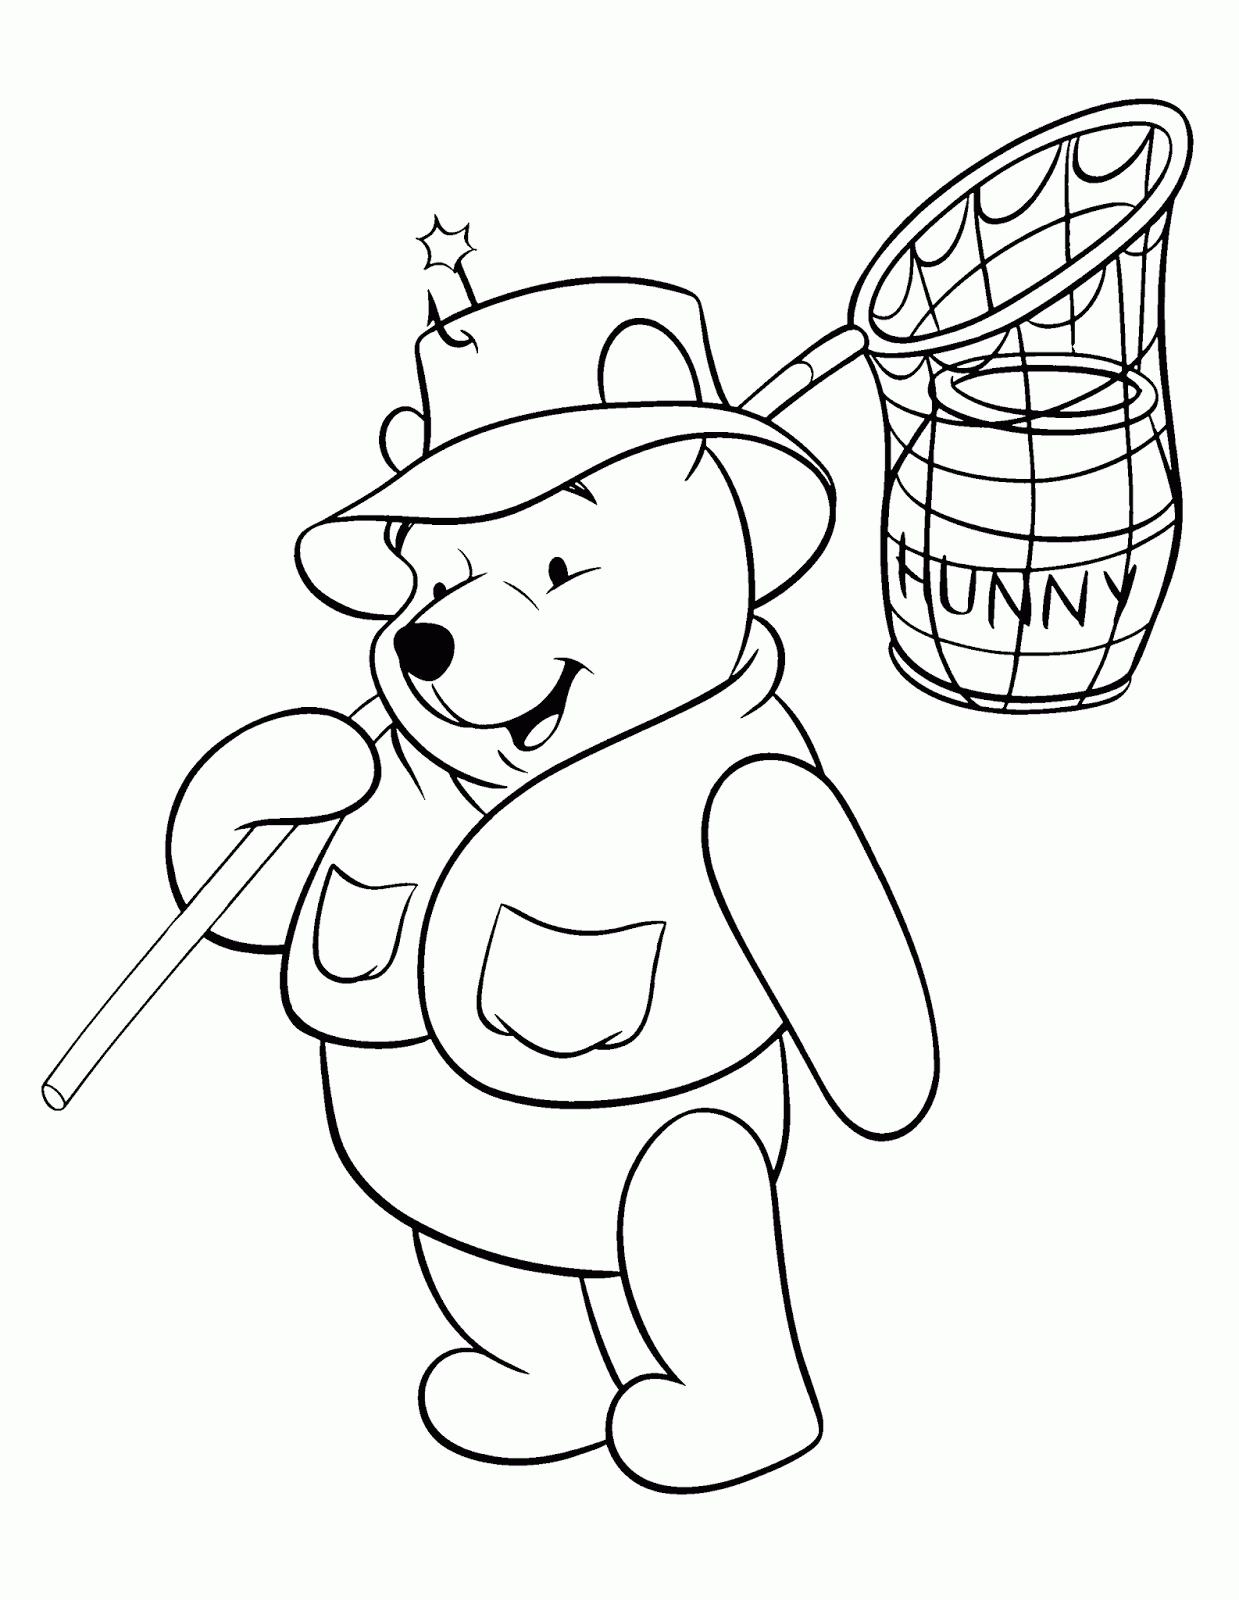 Download Coloring Pages: Winnie the Pooh and Friends Free Printable Coloring Pages